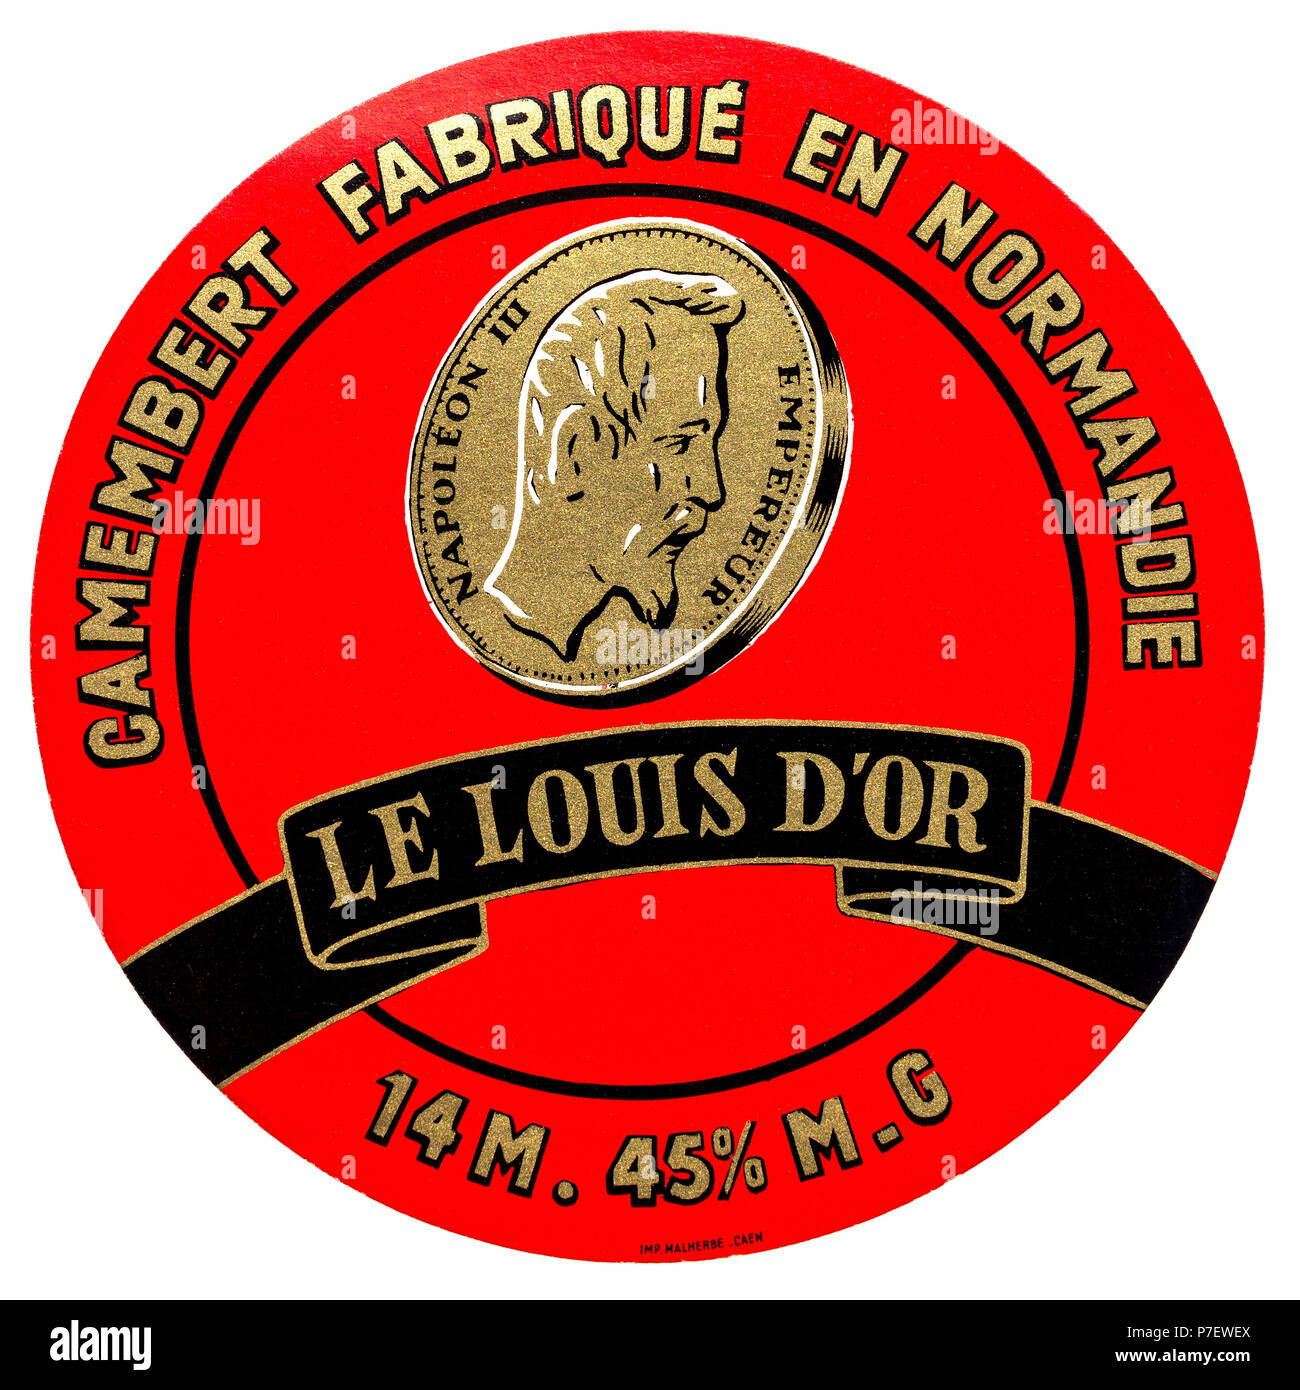 French Camembert cheese box-top label. Stock Photo